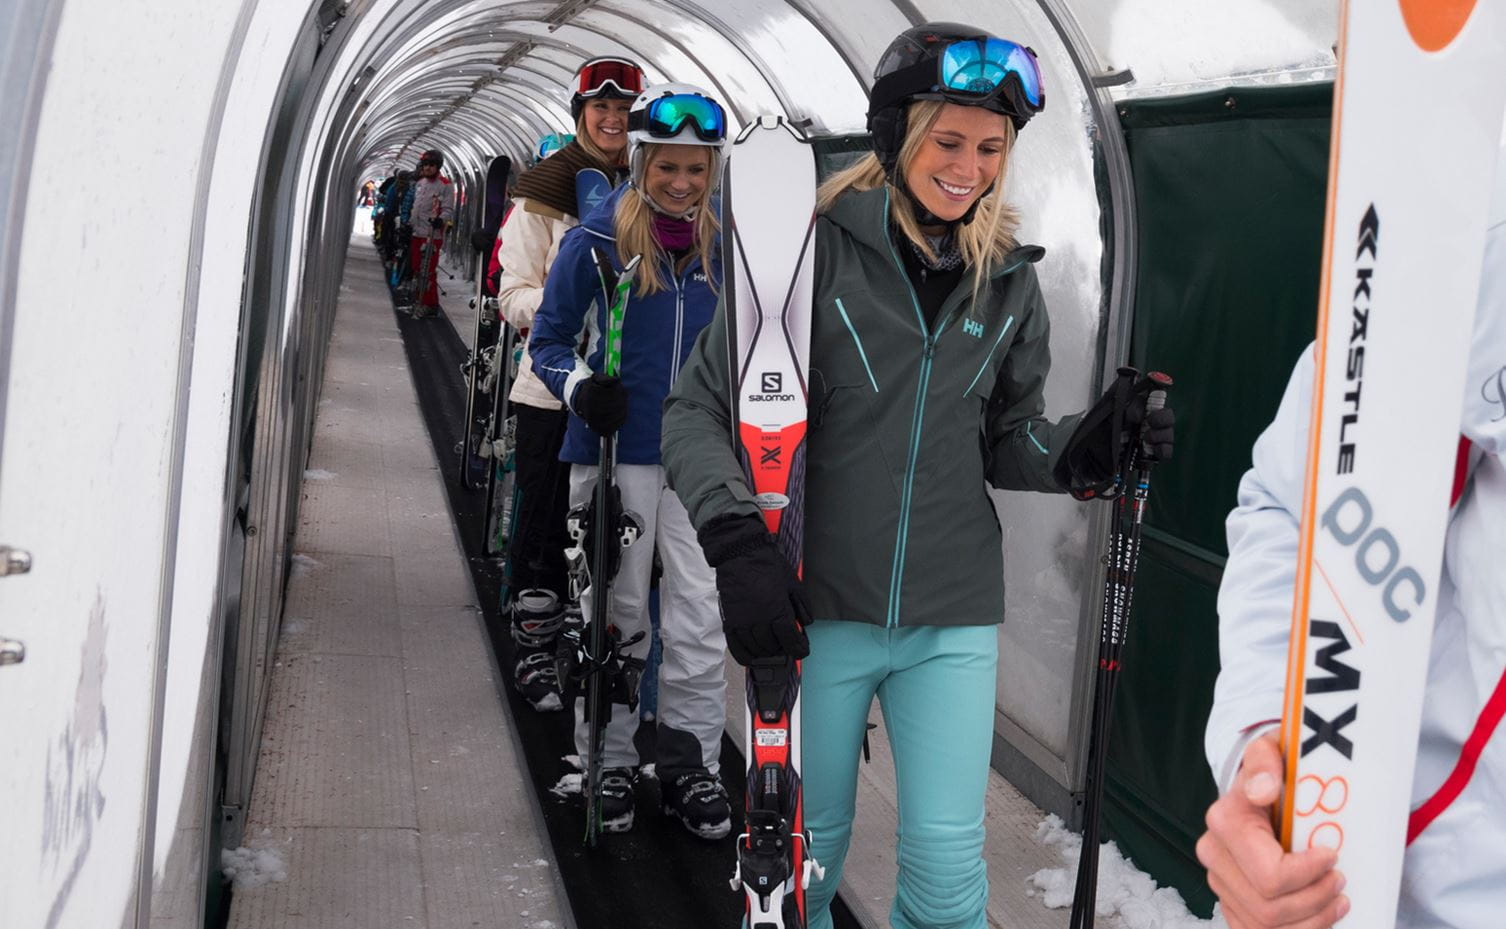 Adults learn to ski for the first time at Snowmass